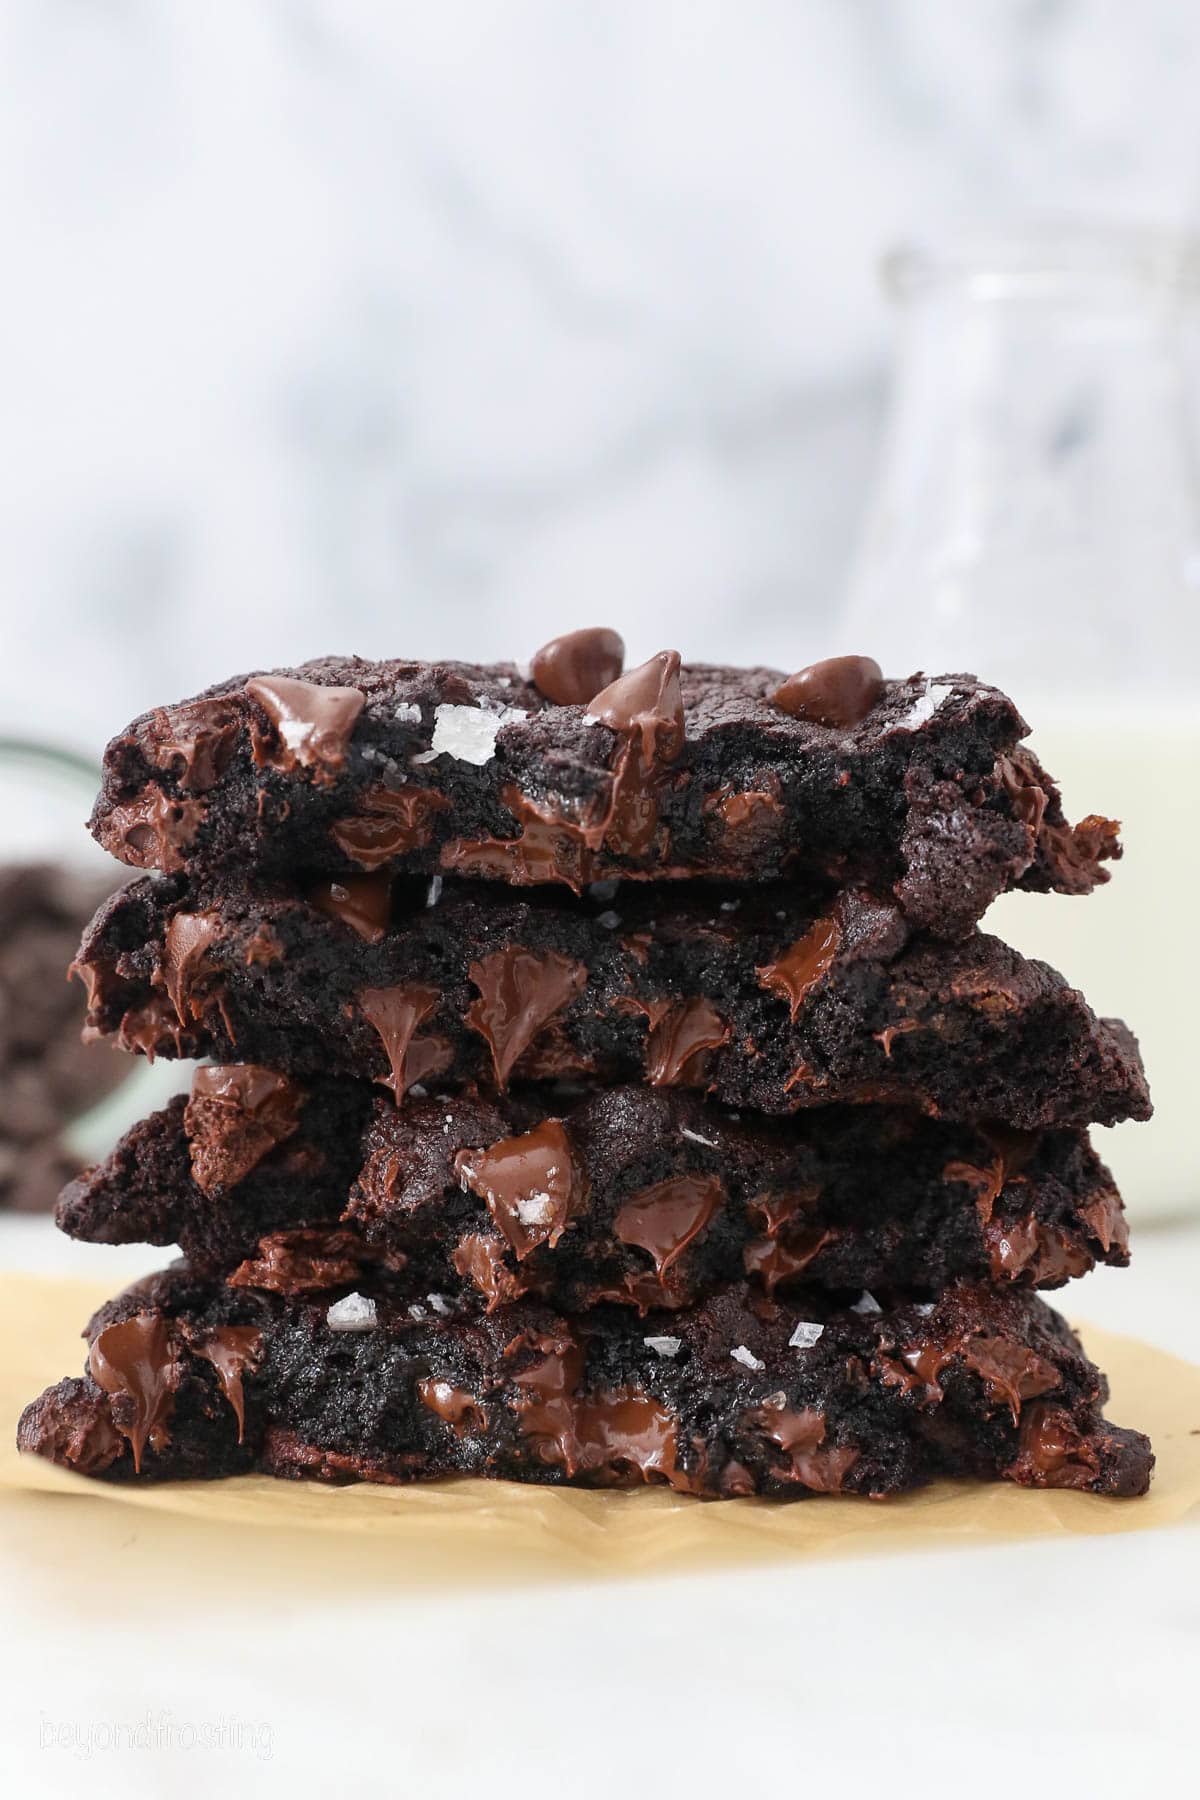 A stack of chocolate cookie halves on a piece of parchment paper.